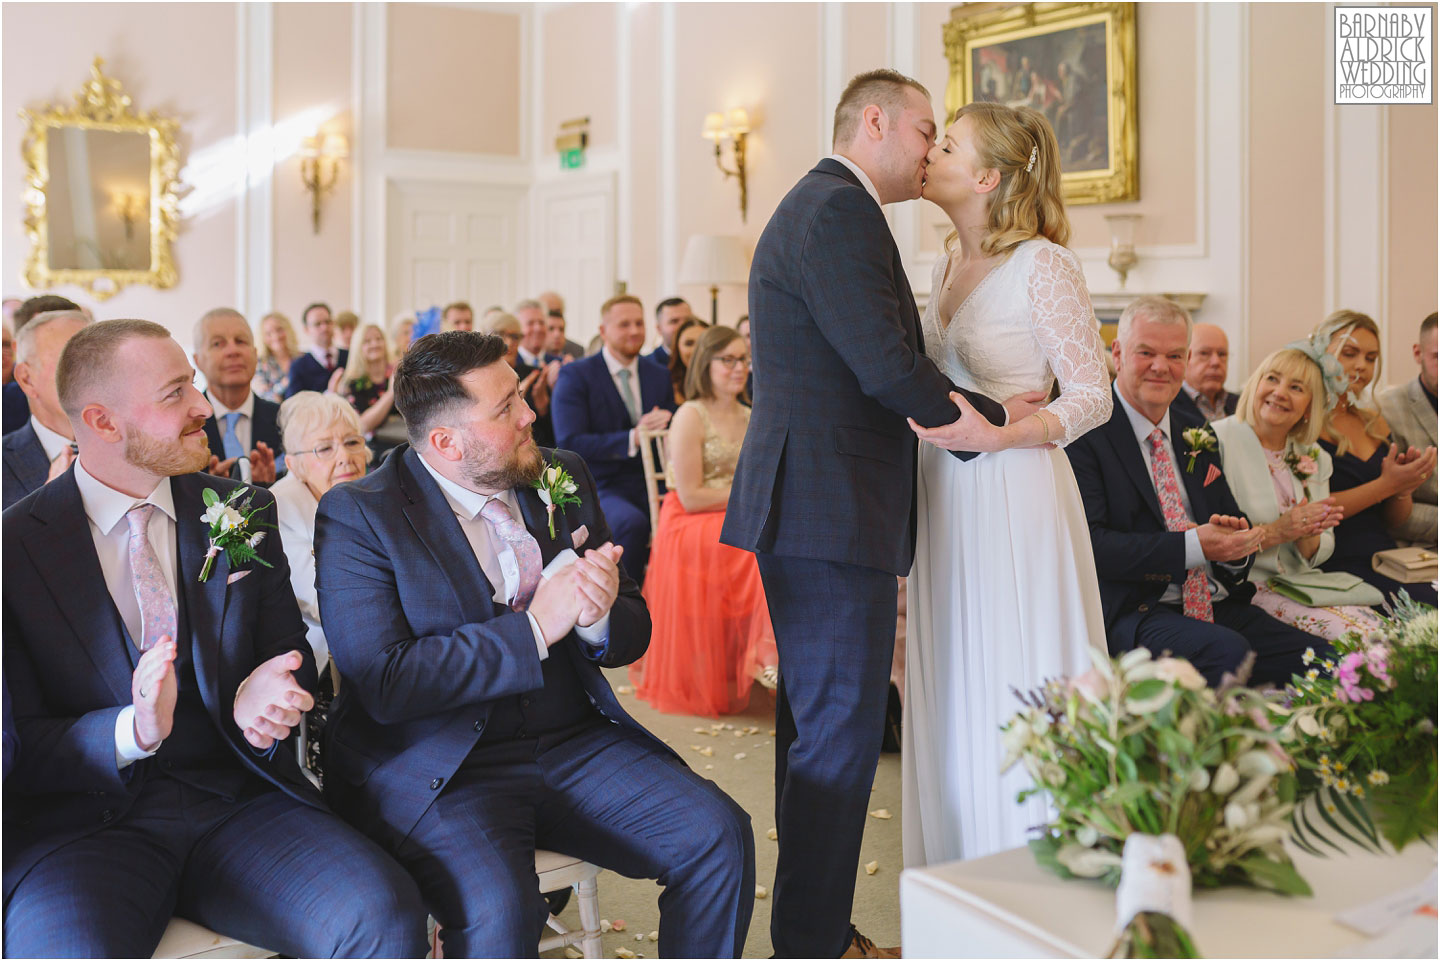 Wedding civil ceremony photography at Bowcliffe Hall in Yorkshire